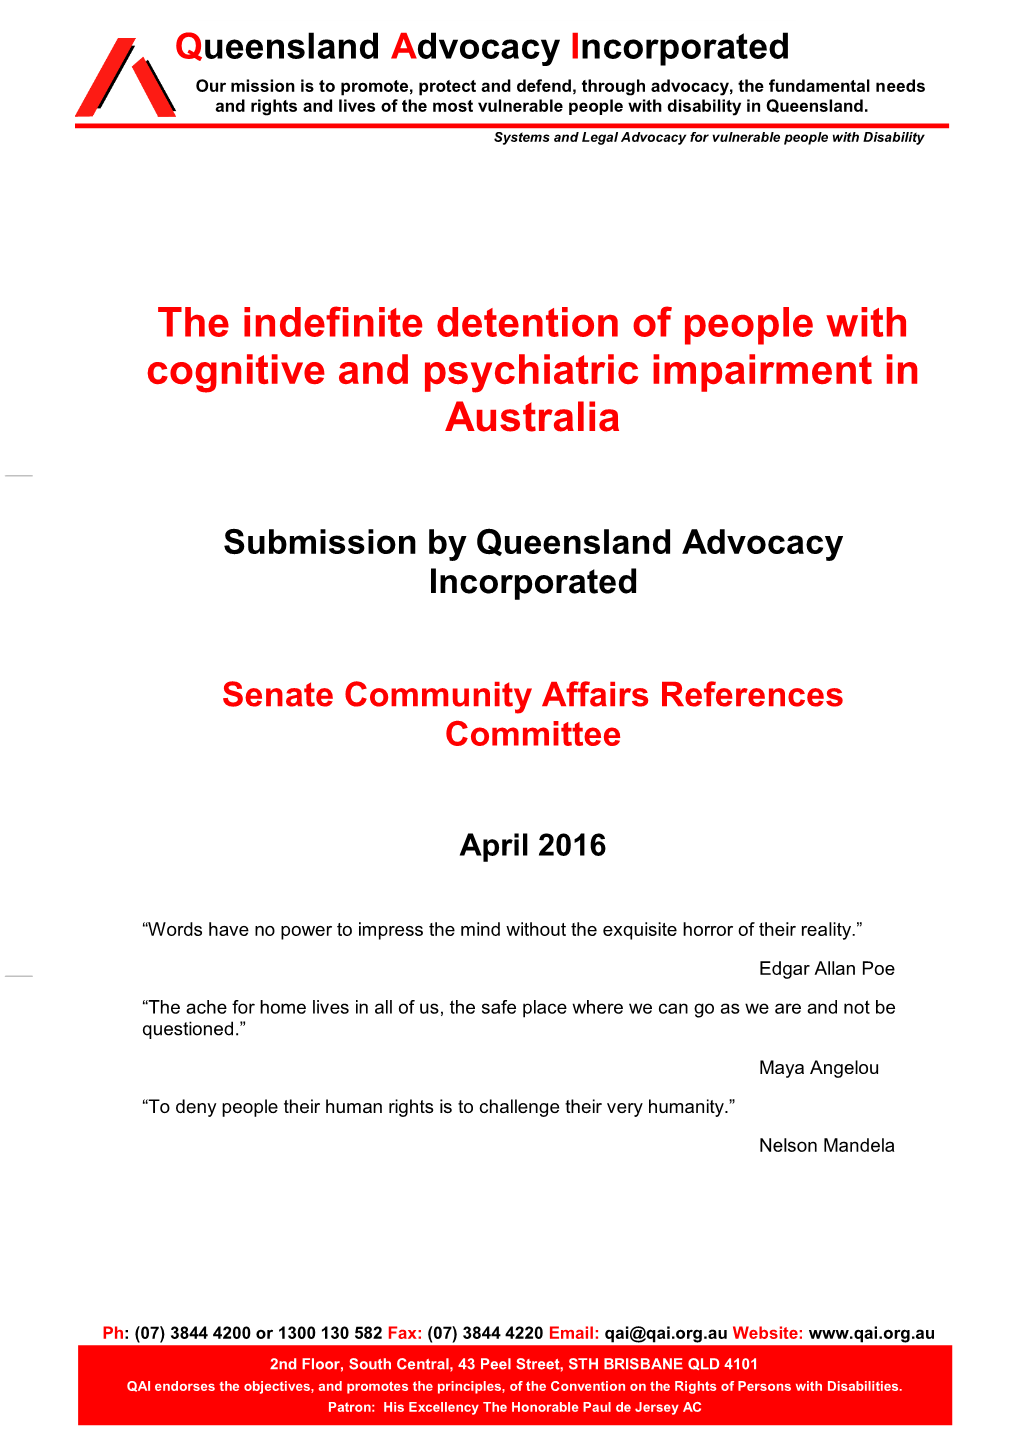 The Indefinite Detention of People with Cognitive and Psychiatric Impairment in Australia